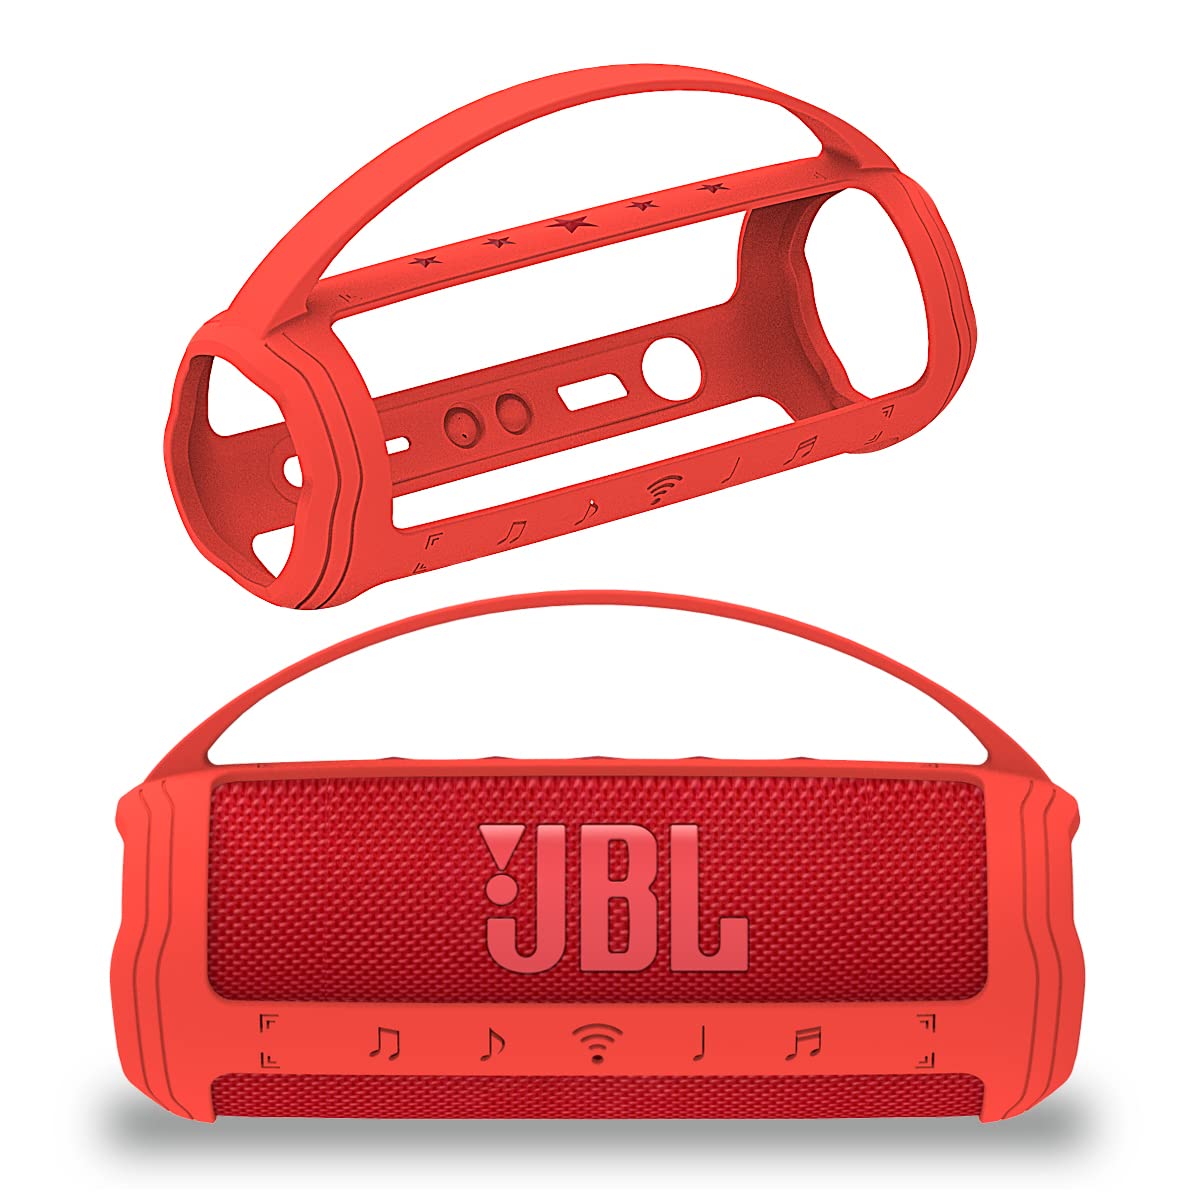 Silicone Cover Case for JBL Flip 6 Portable Bluetooth Speaker, Protective Carrying Case for JBL Flip 6 Speaker Accessories (Only Case) (Red Case)